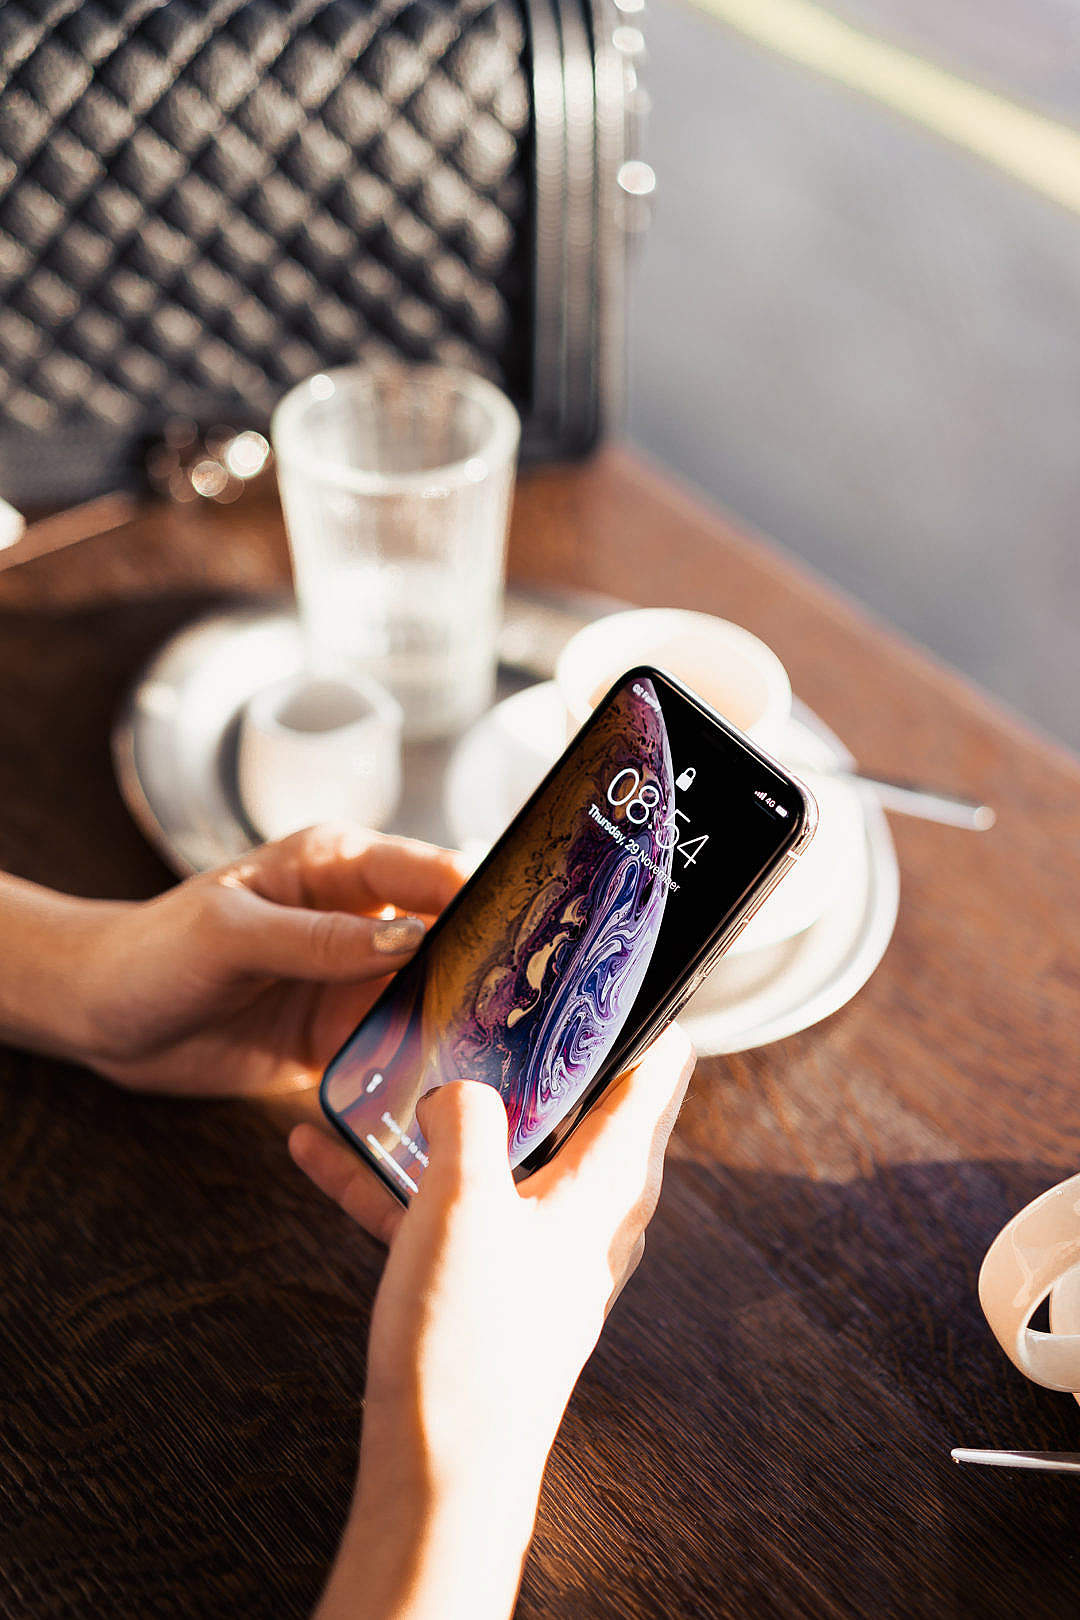 Download Using Modern Smartphone in a Café FREE Stock Photo